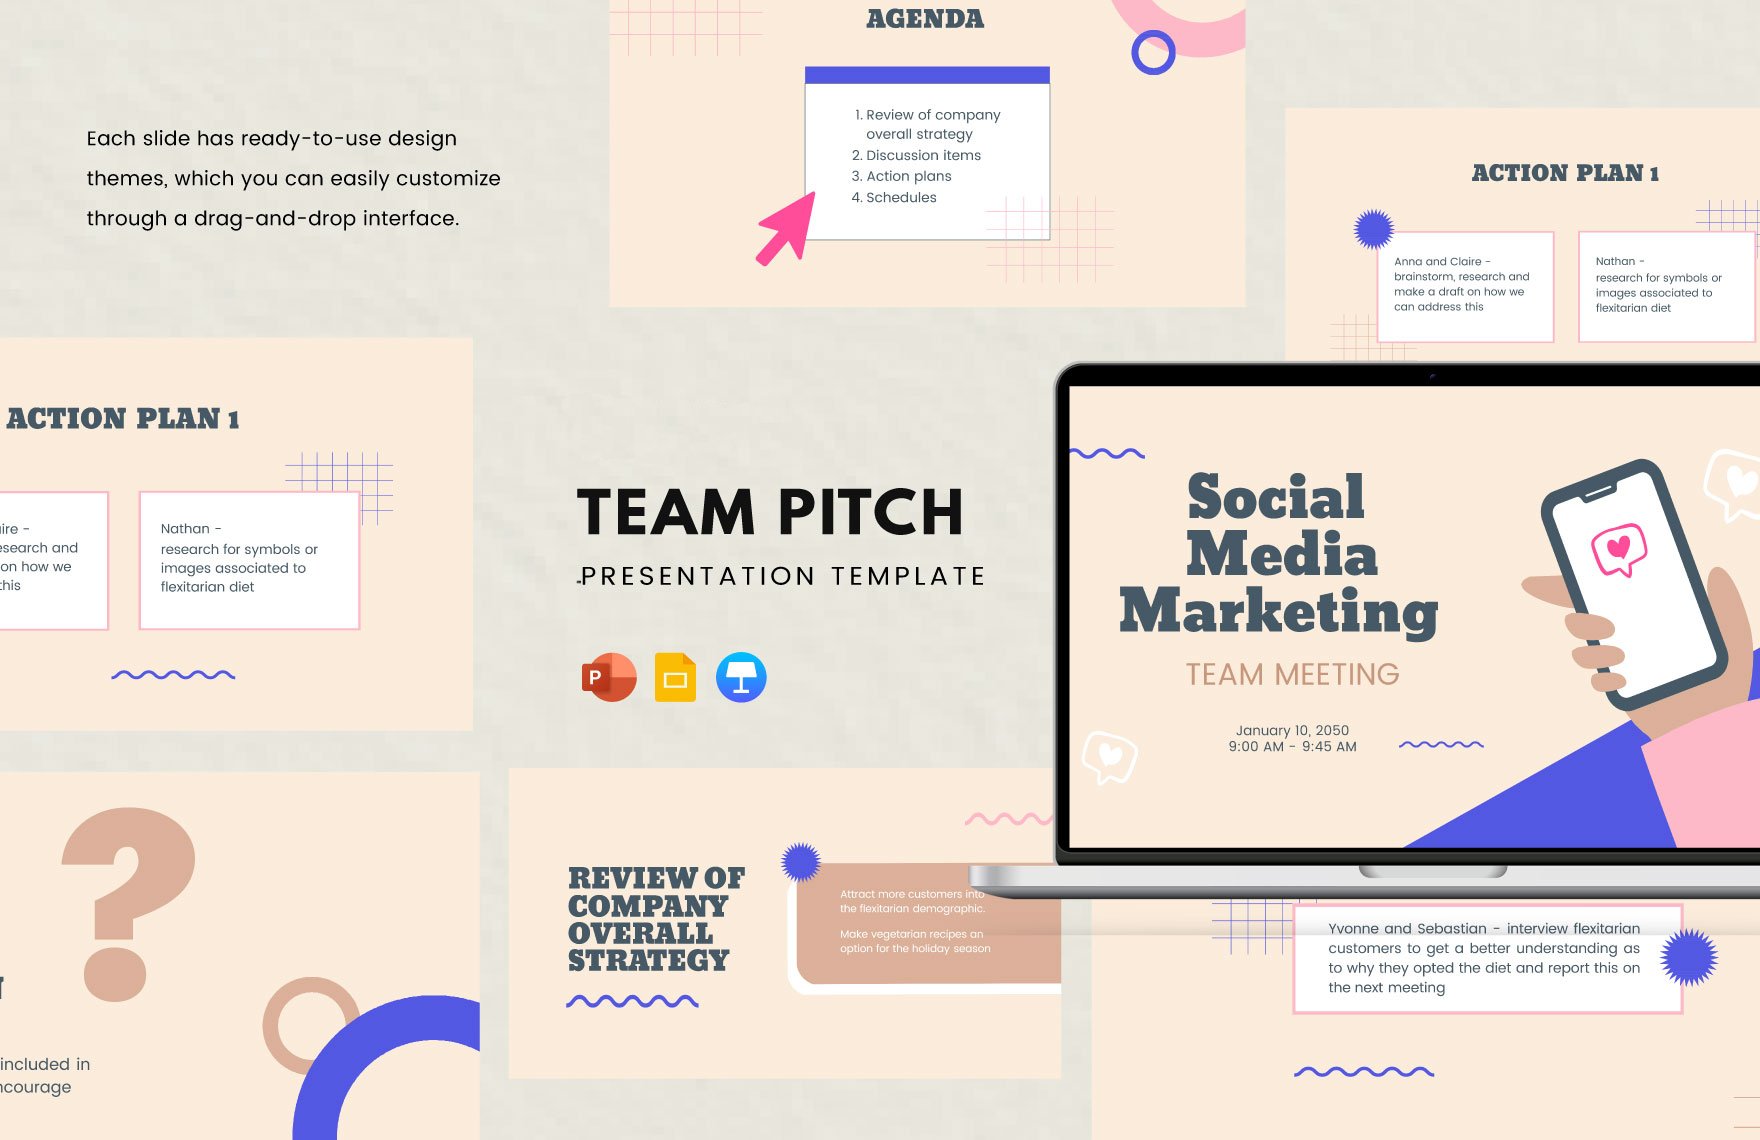 Team Pitch Template